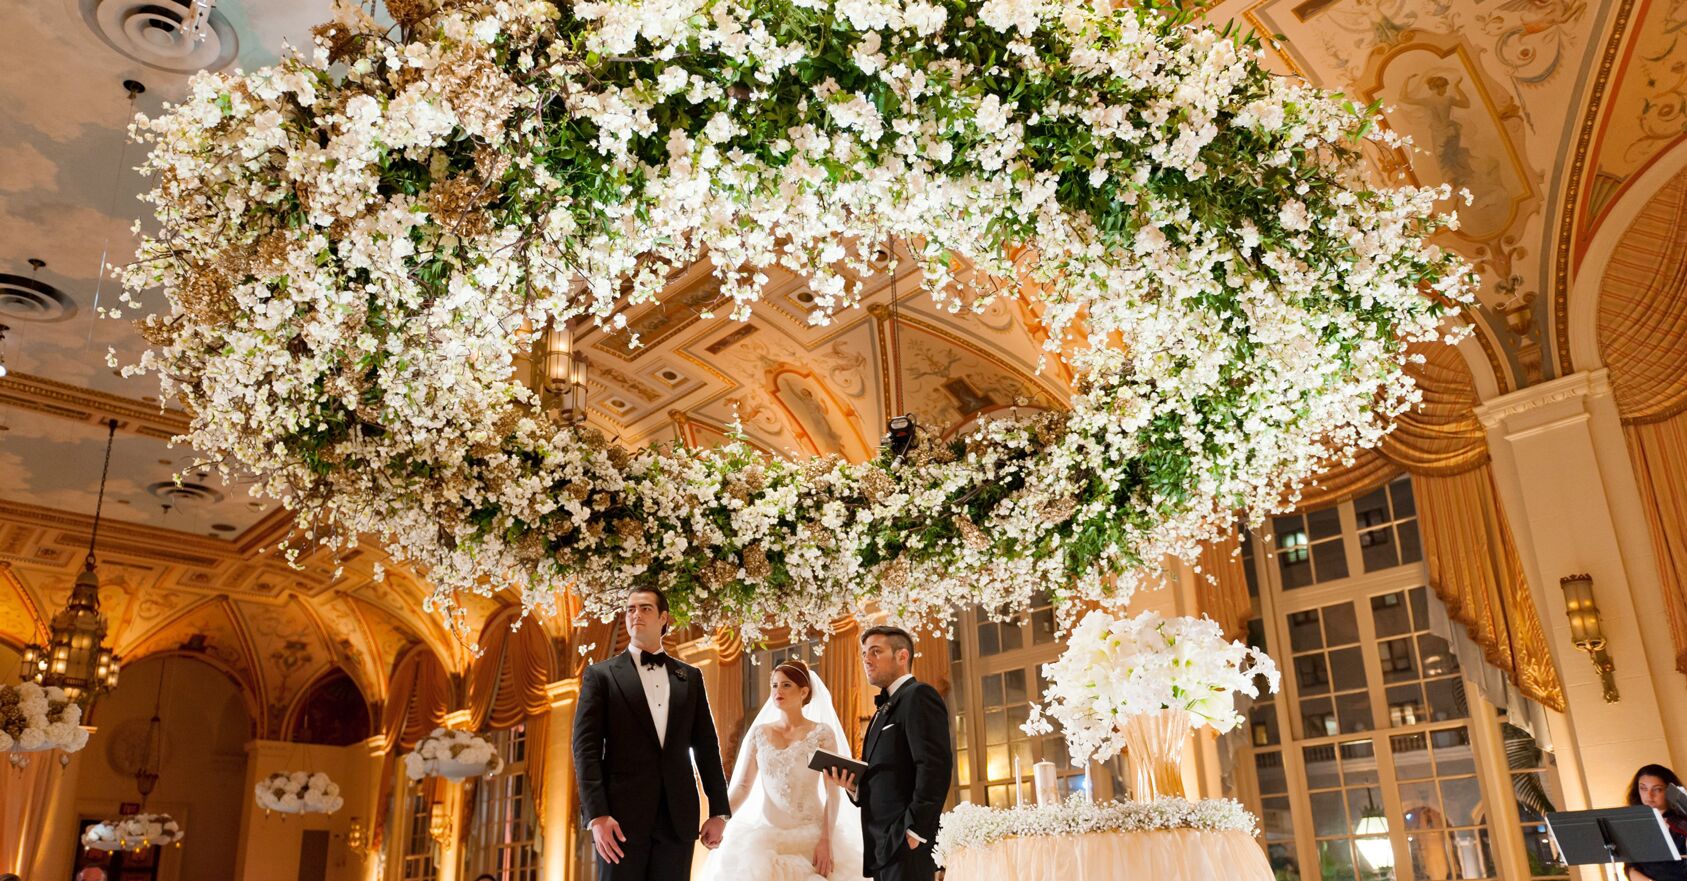 Average Cost Of Wedding Flowers Heres How Much Wedding Flowers Cost